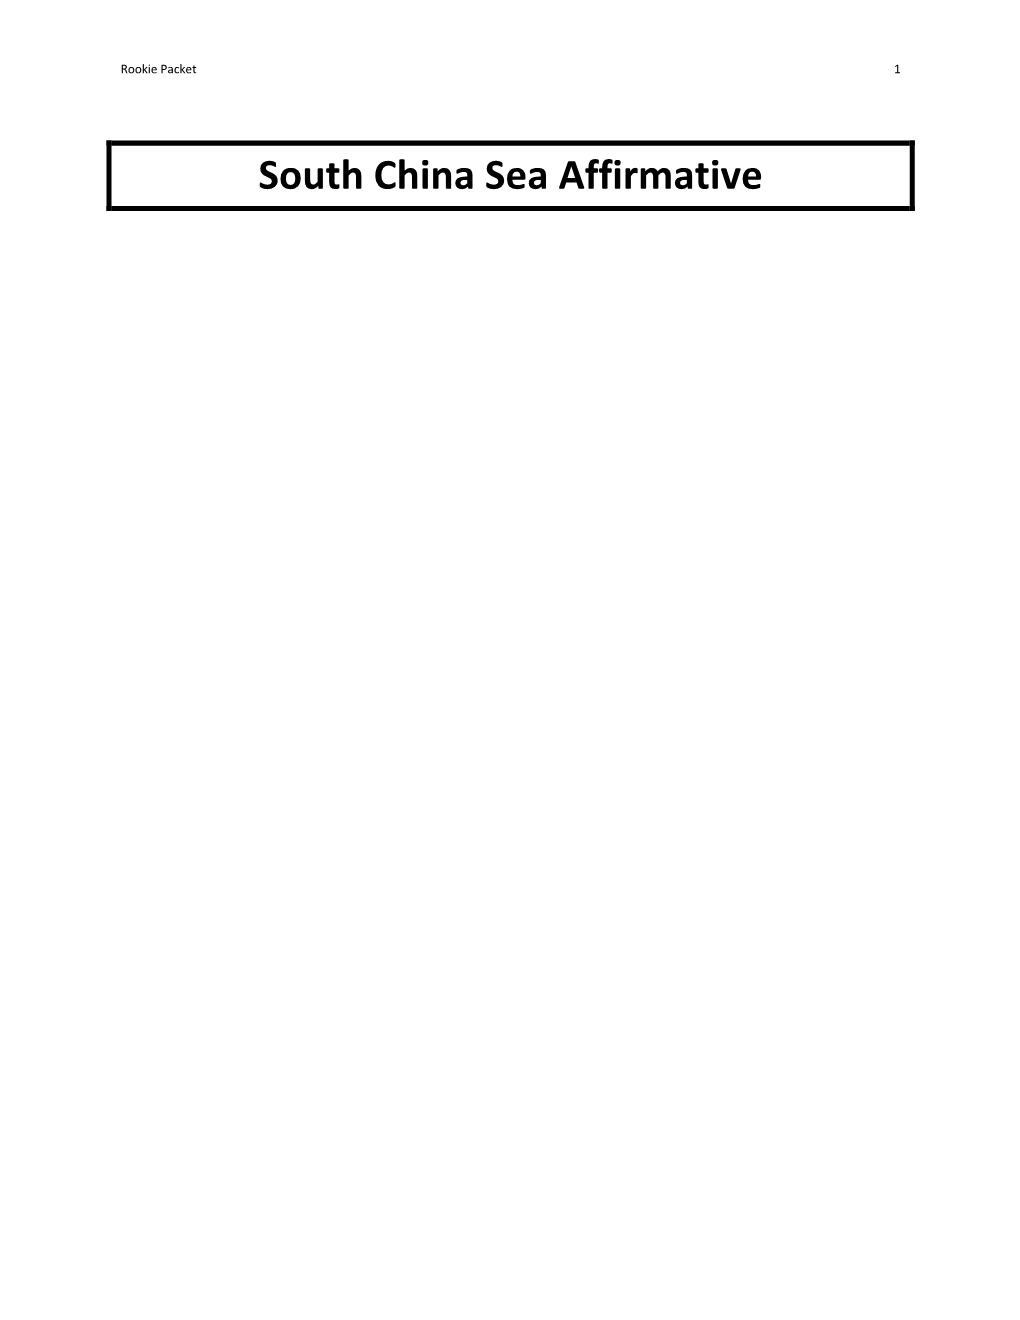 South China Sea Affirmative Rookie Packet 2